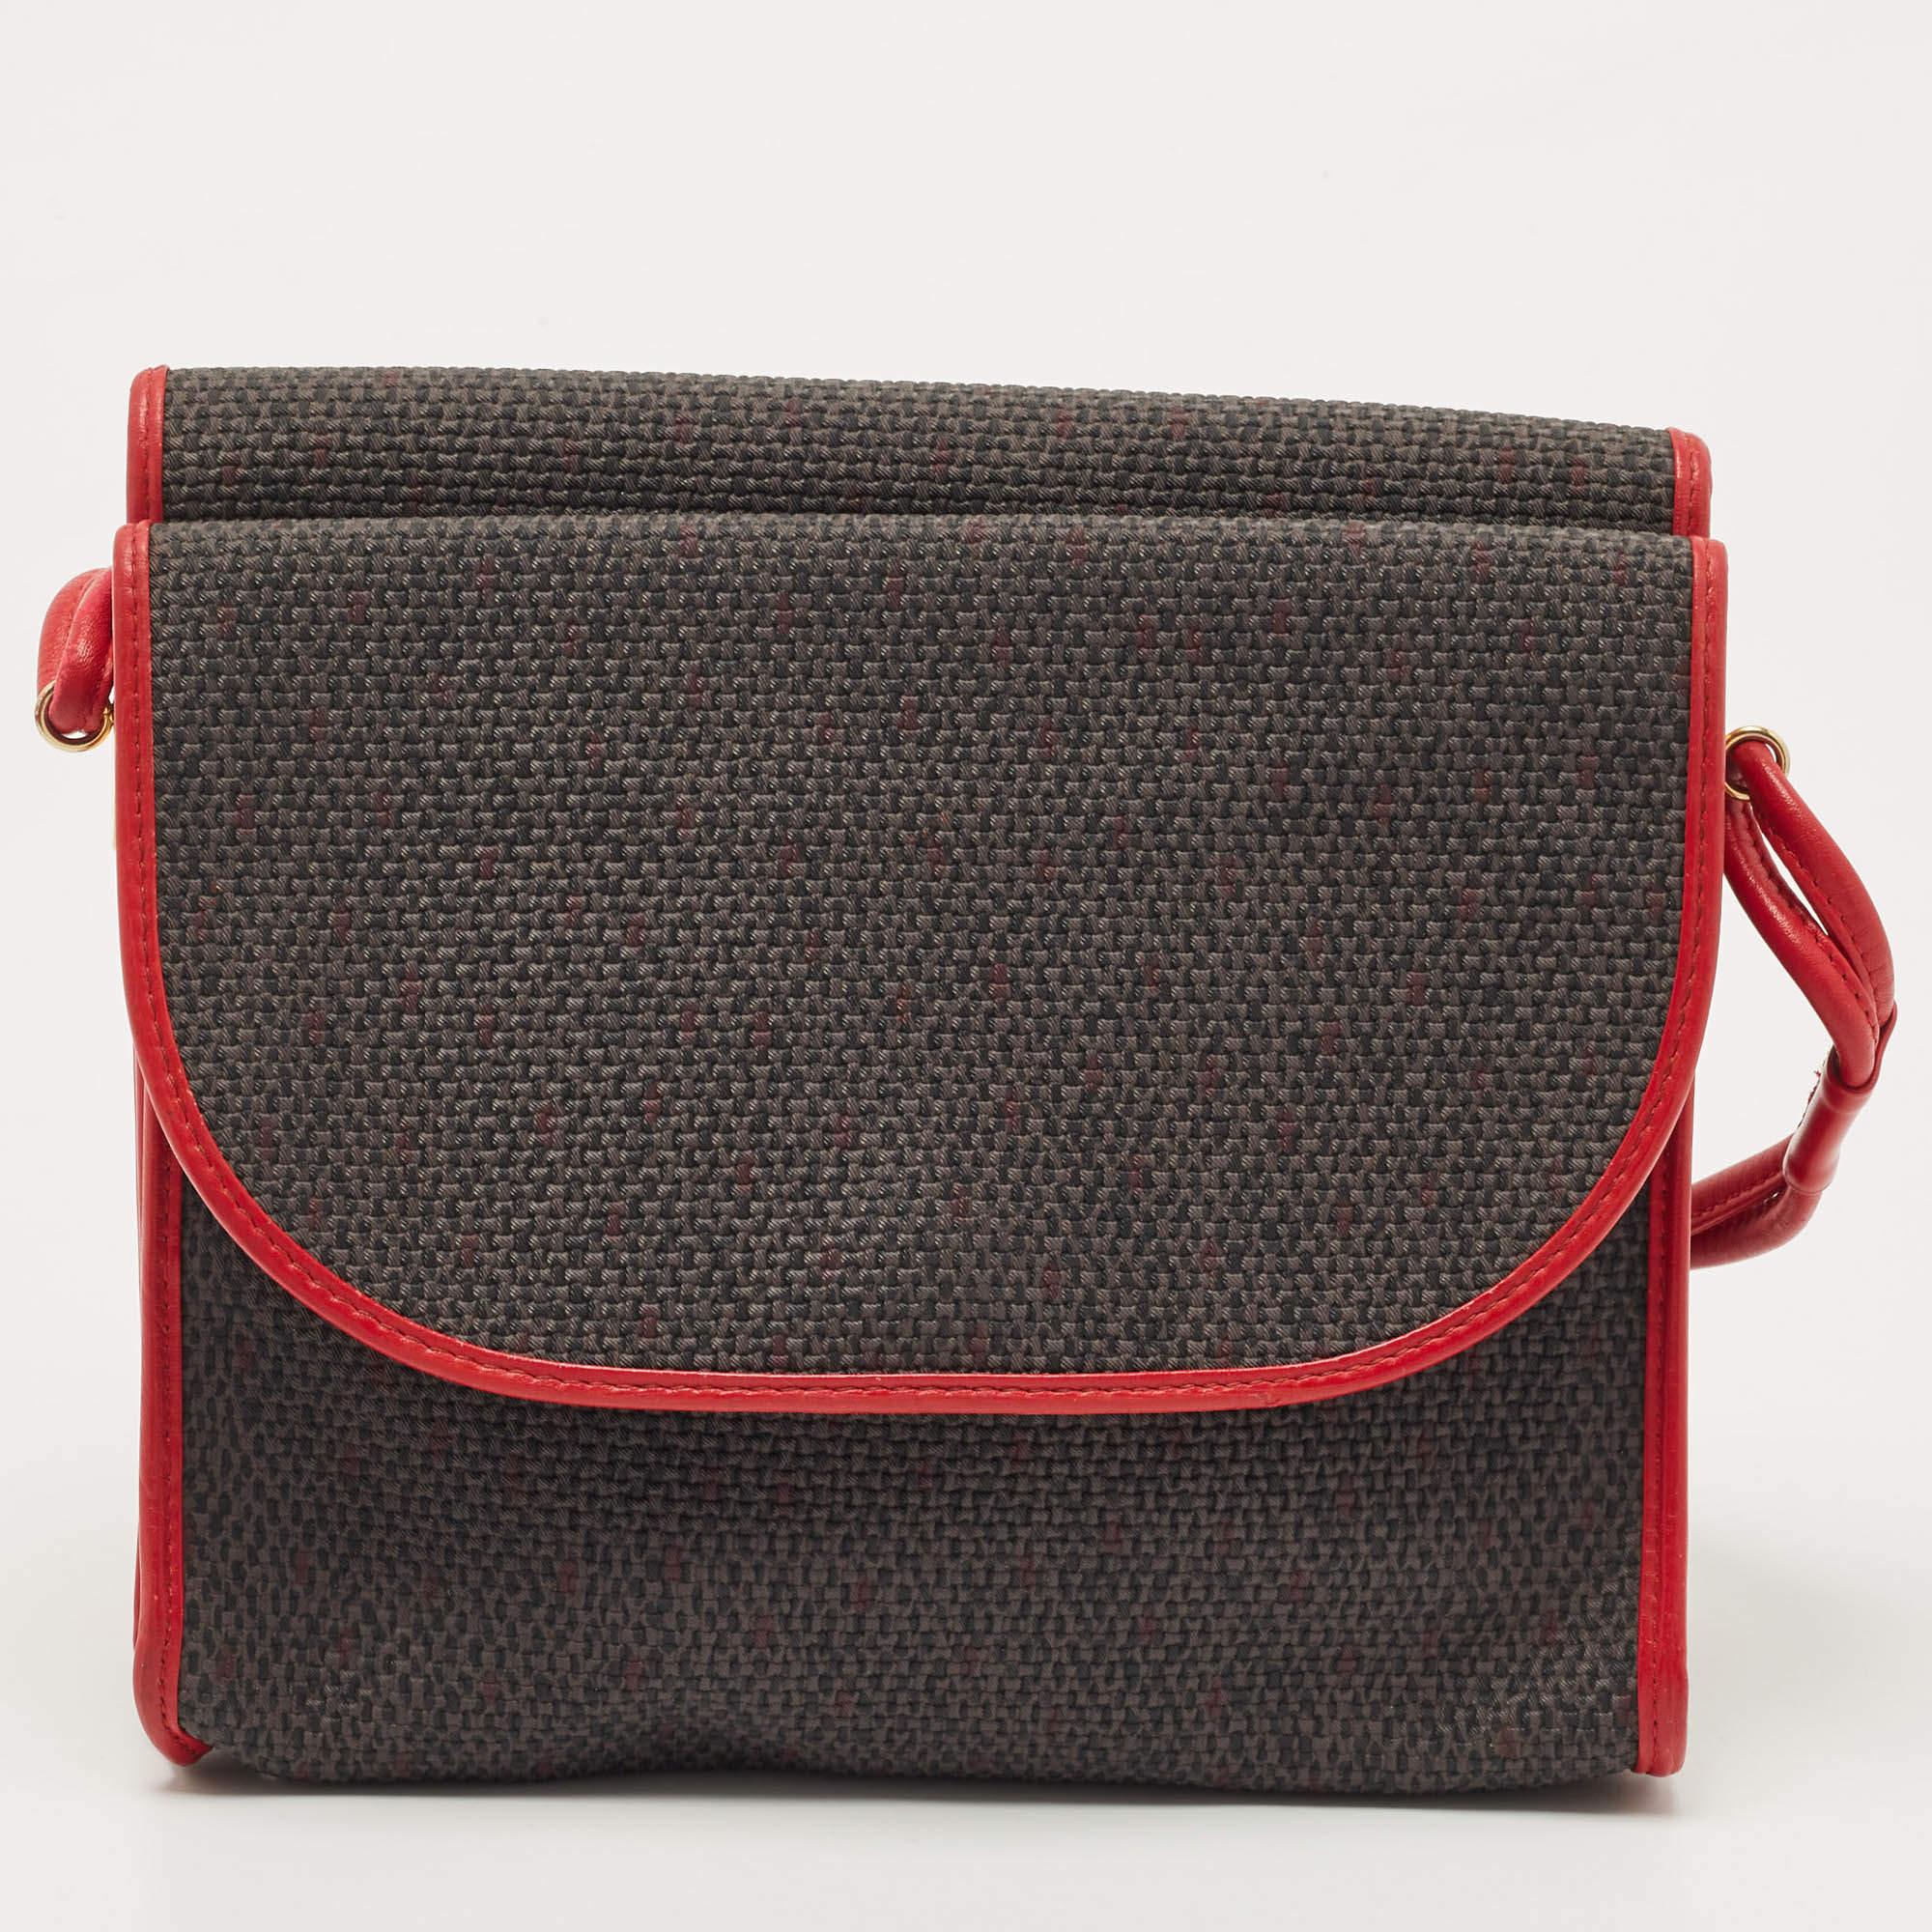 Designed to last, this beautiful crossbody bag is a smart buy. Comfortable and easy to carry, this handy creation comes with an interior lined to keep your essentials organized and safe.

